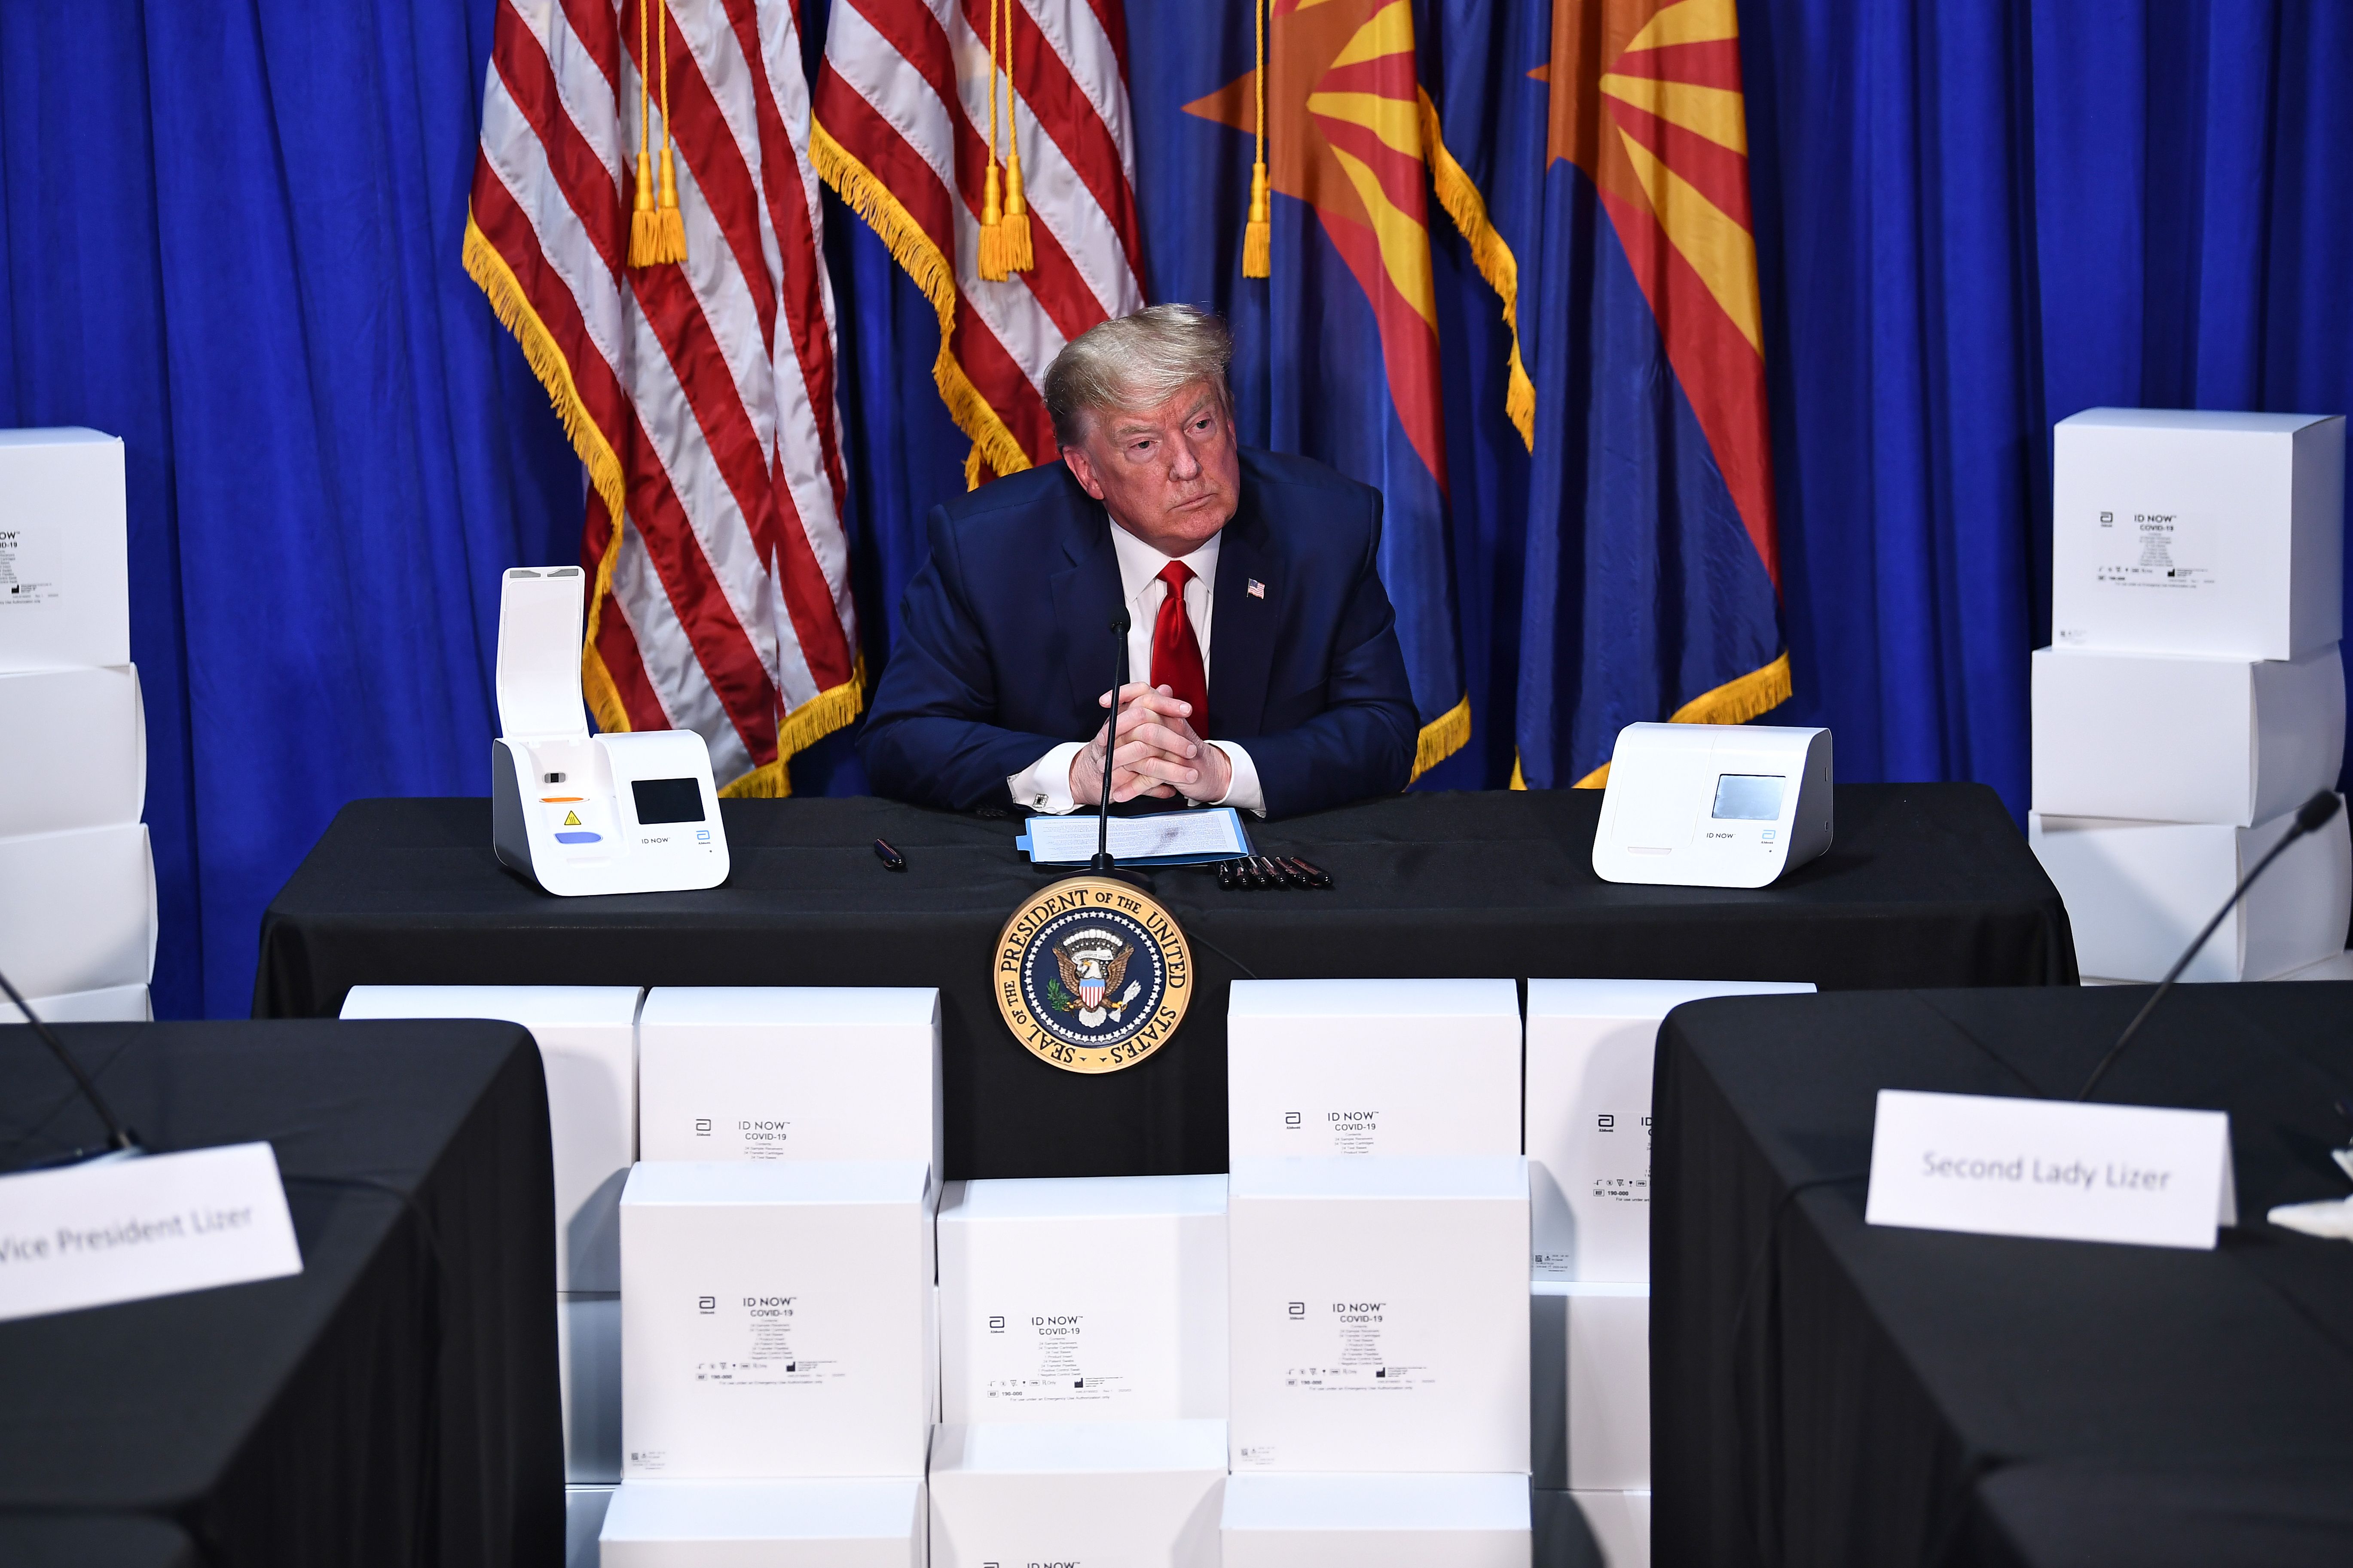 President Donald Trump takes part in a roundtable in Phoenix on May 5 about supporting Native Americans during the coronavirus pandemic. Trump also participated in a tour of a Honeywell plant that manufactures personal protective equipment, such as N95 masks.